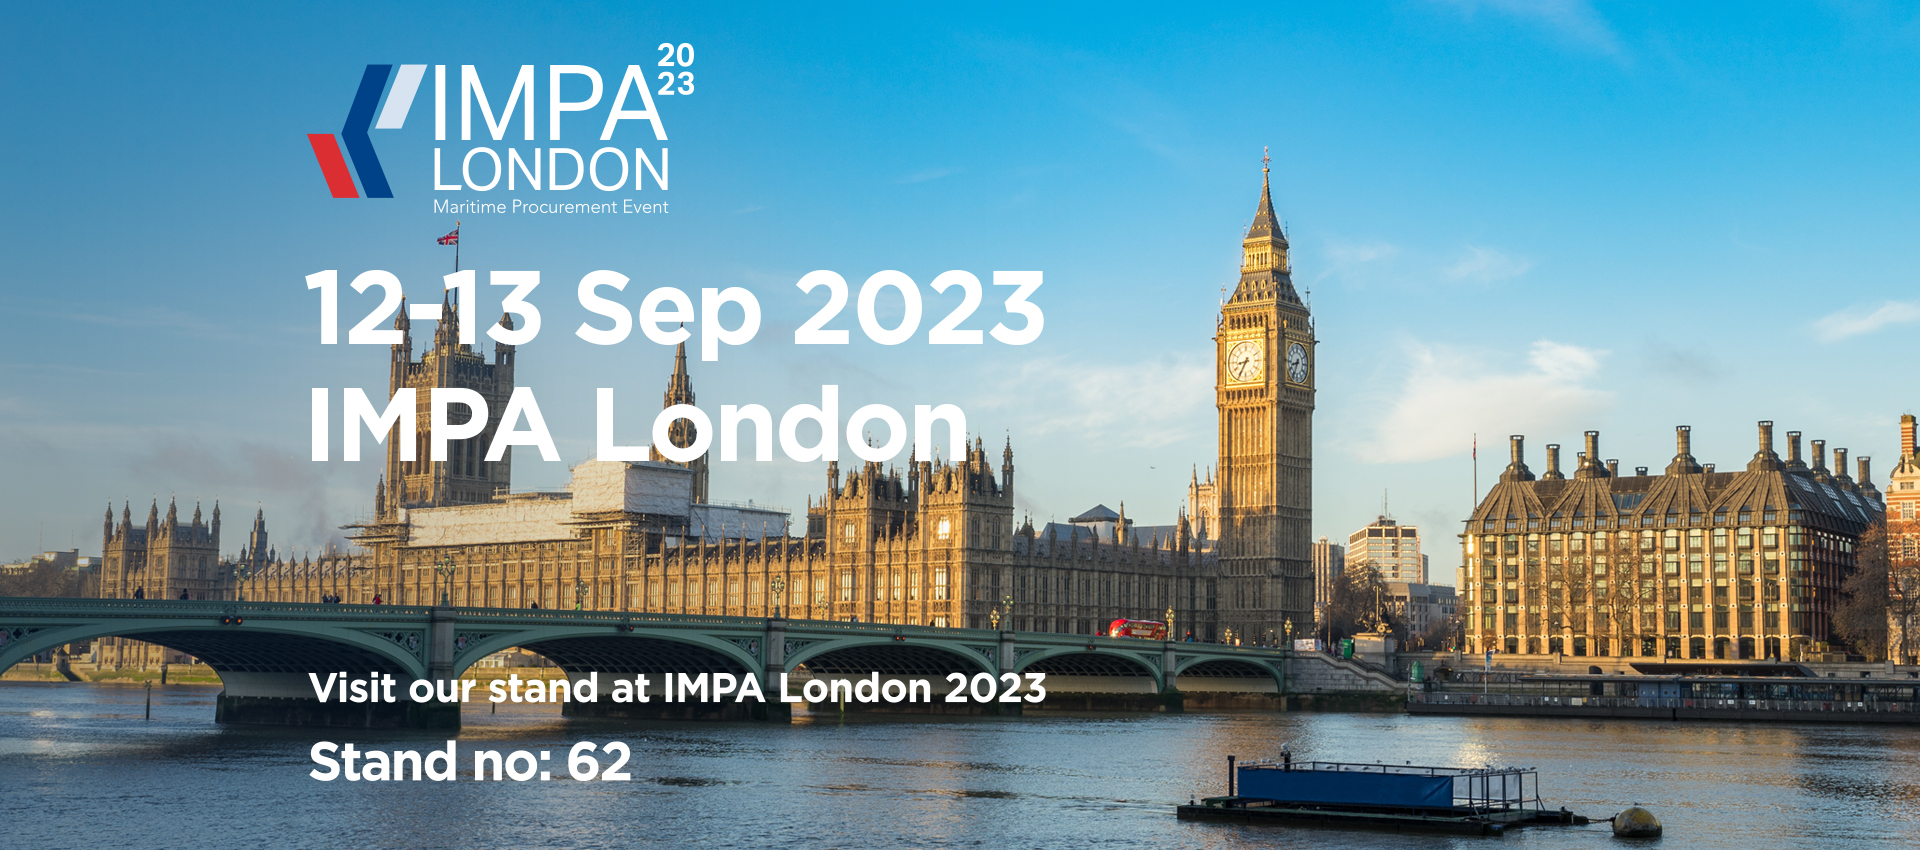 Visit our stand at IMPA London 2023